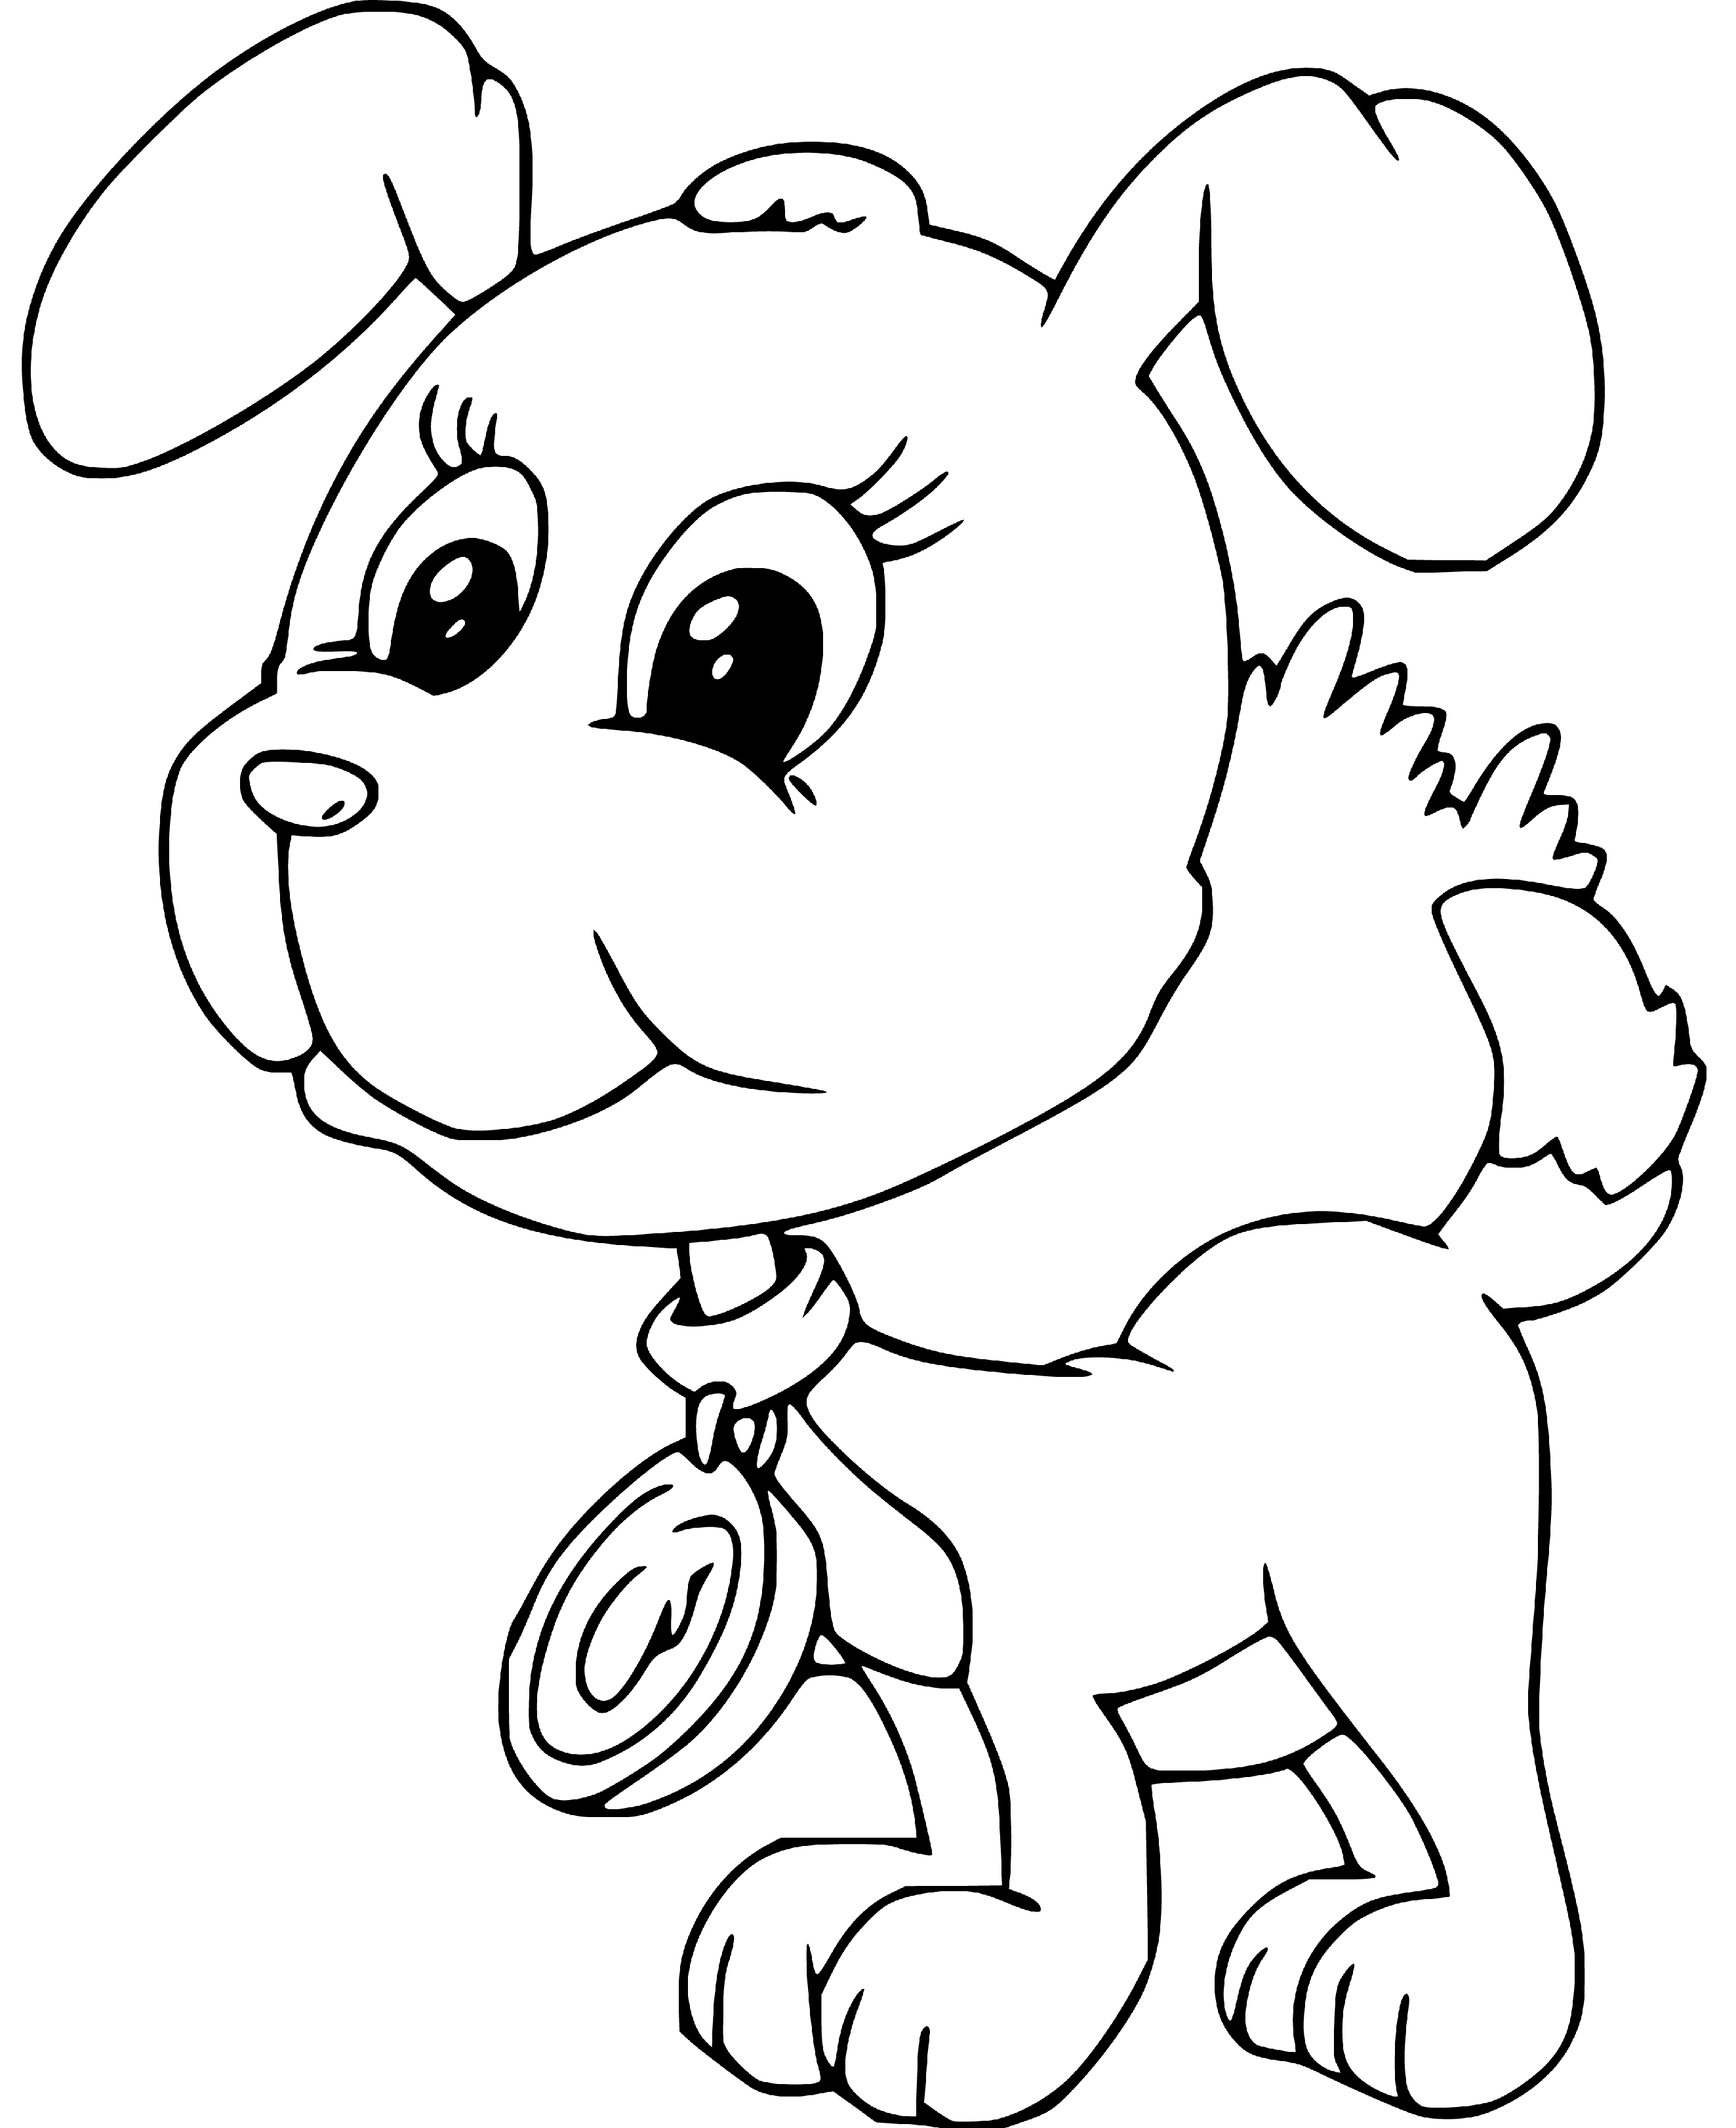 Printable Cute Pup Coloring Page for kids.